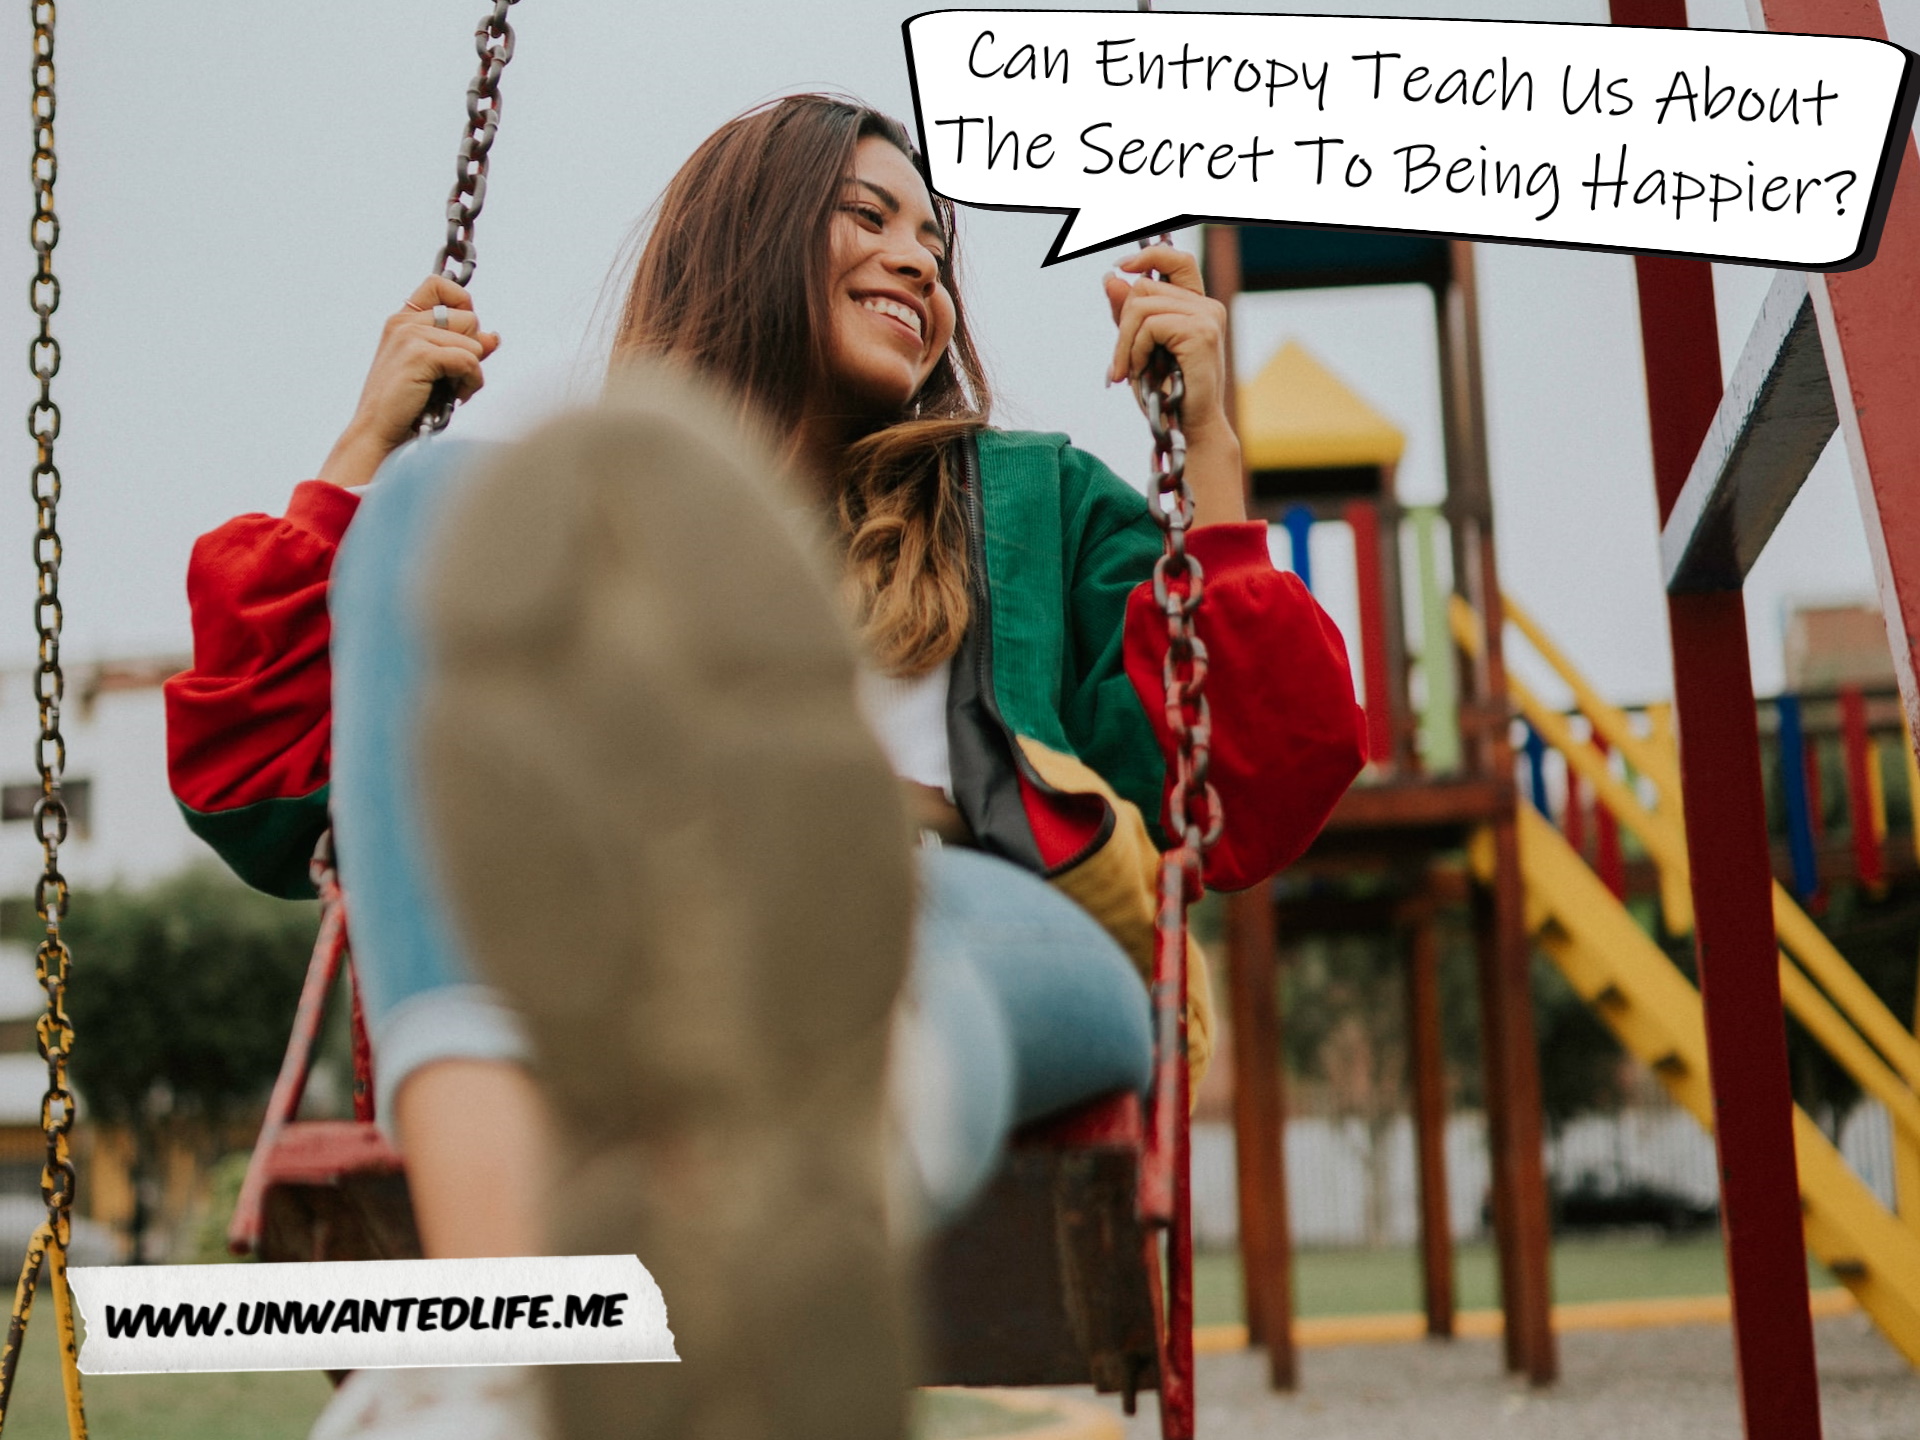 A photo of a White woman swinging on swing in a playground whilst smiling to represent the topic of the article - Can Entropy Teach Us About The Secret To Being Happier?